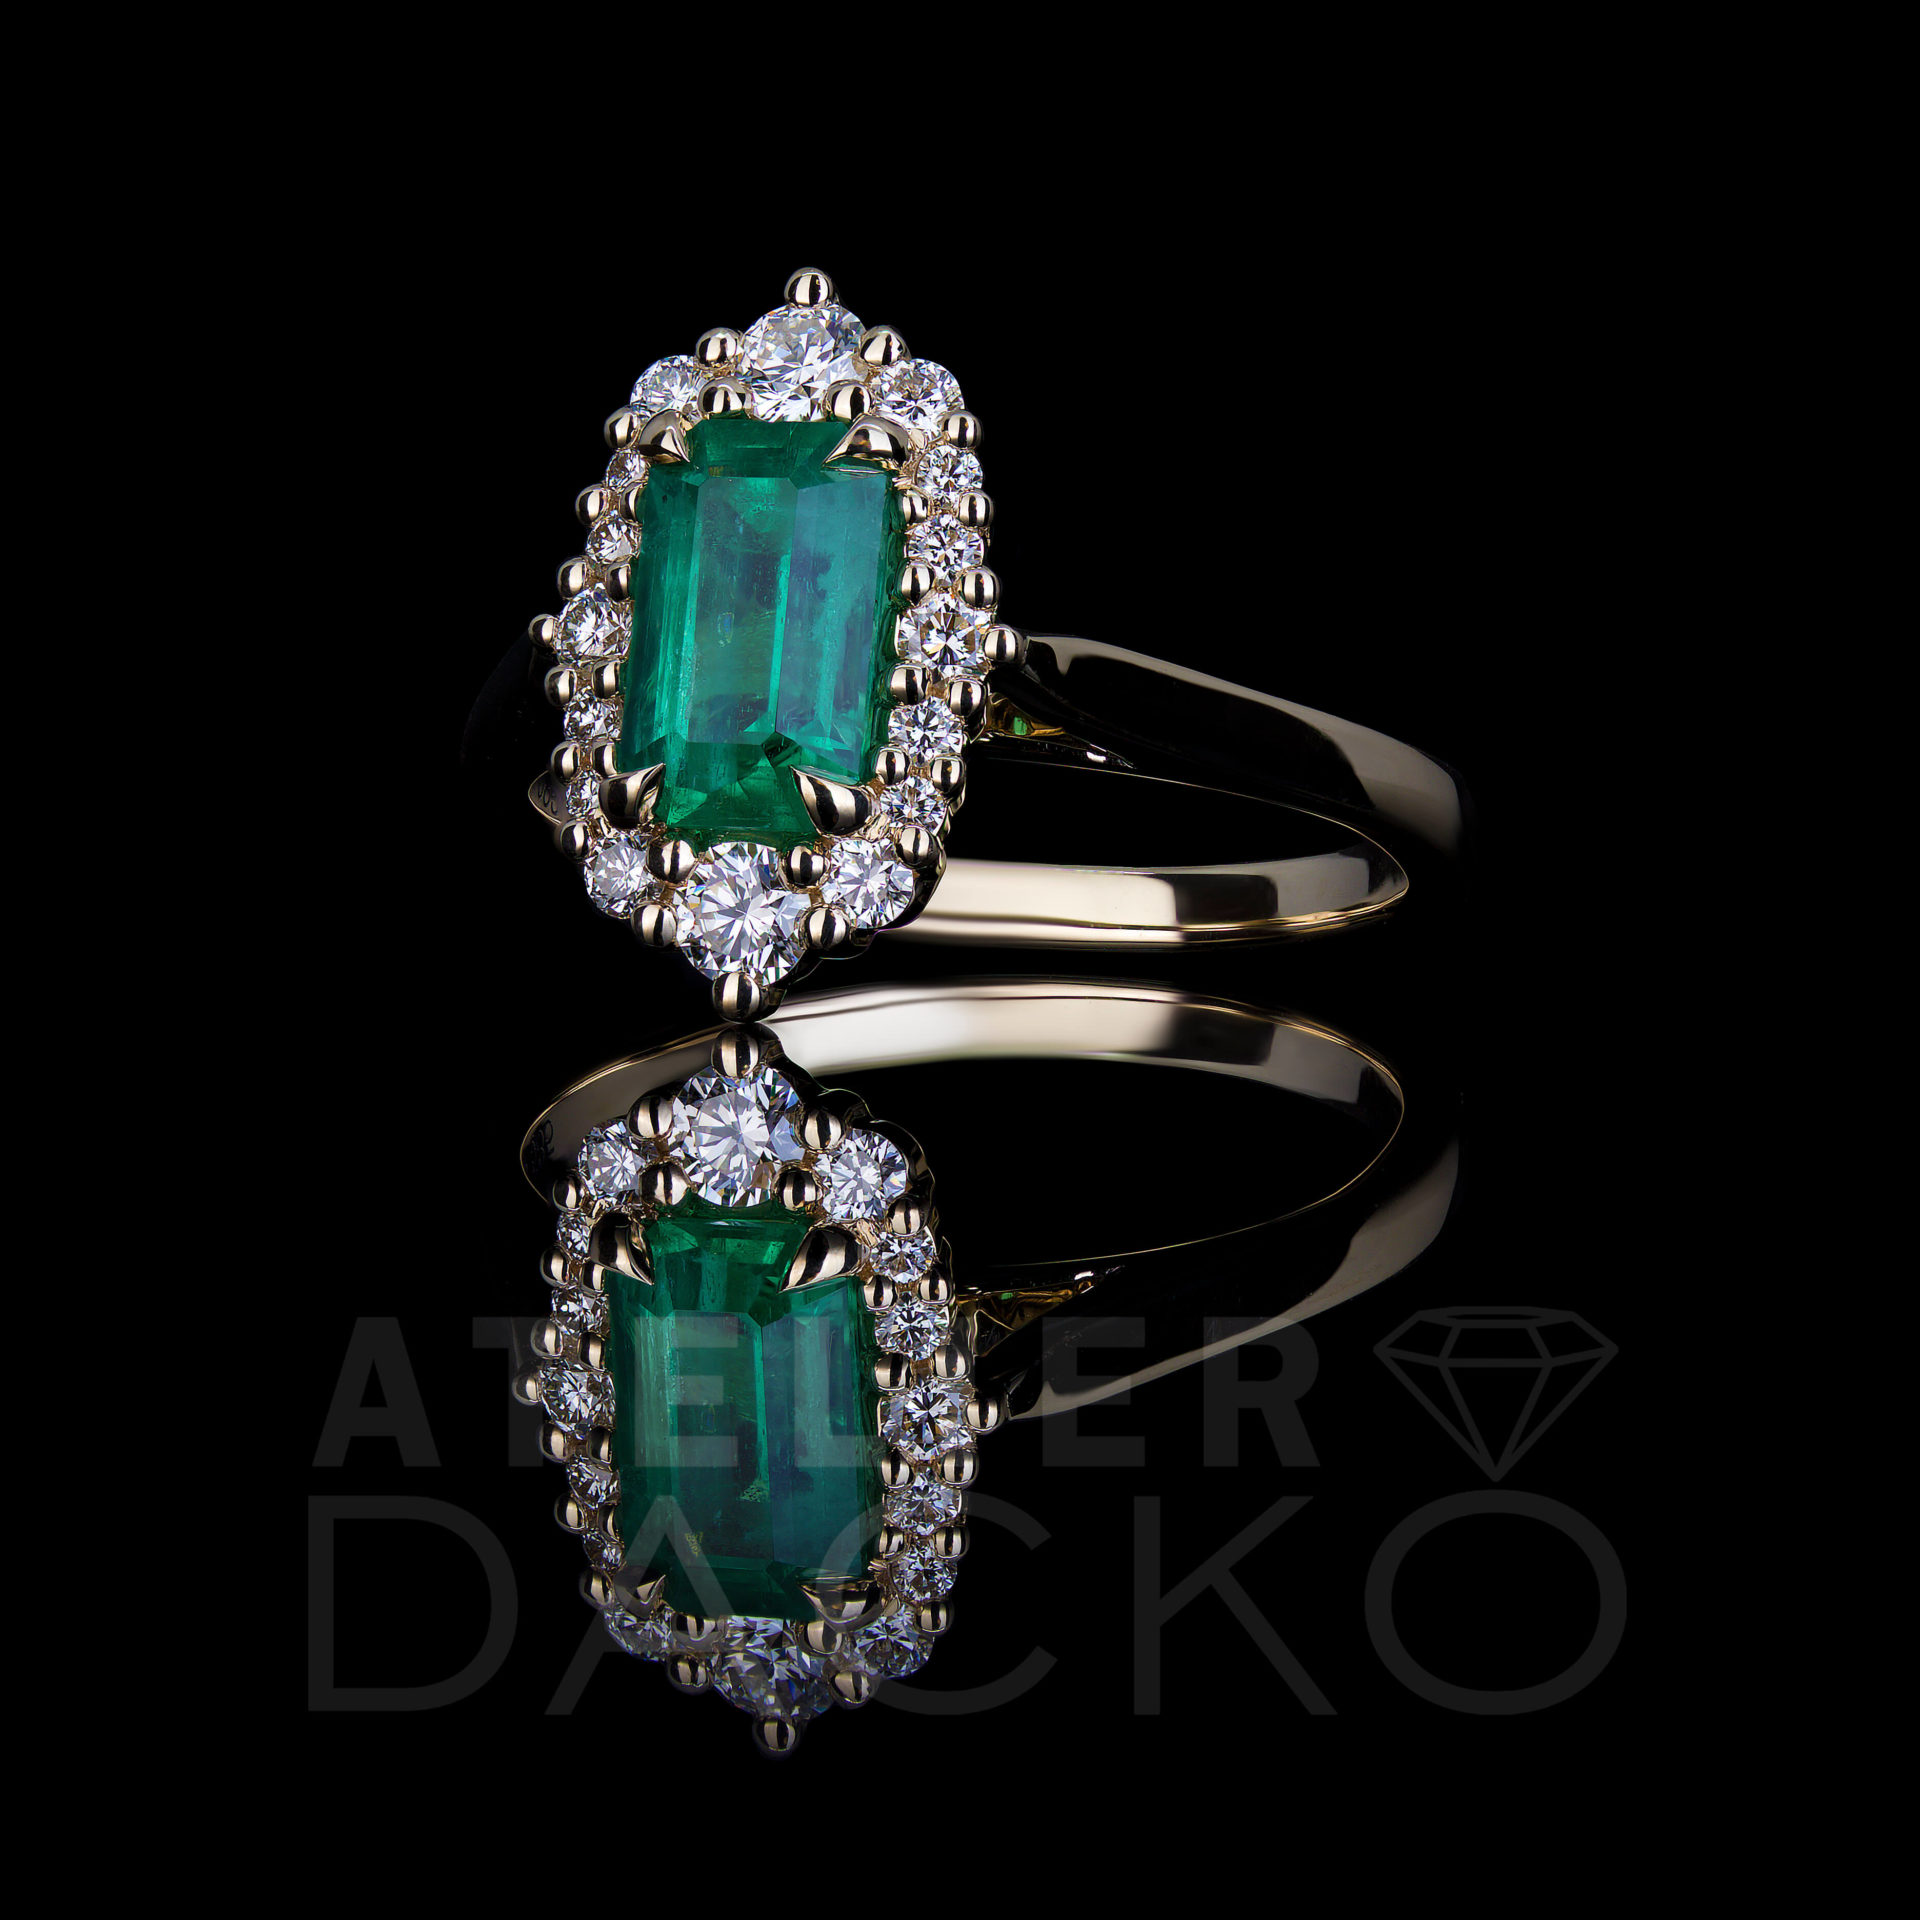 Side Facing 1.12 CT Emerald Ring with a Modern Vintage Diamond Halo